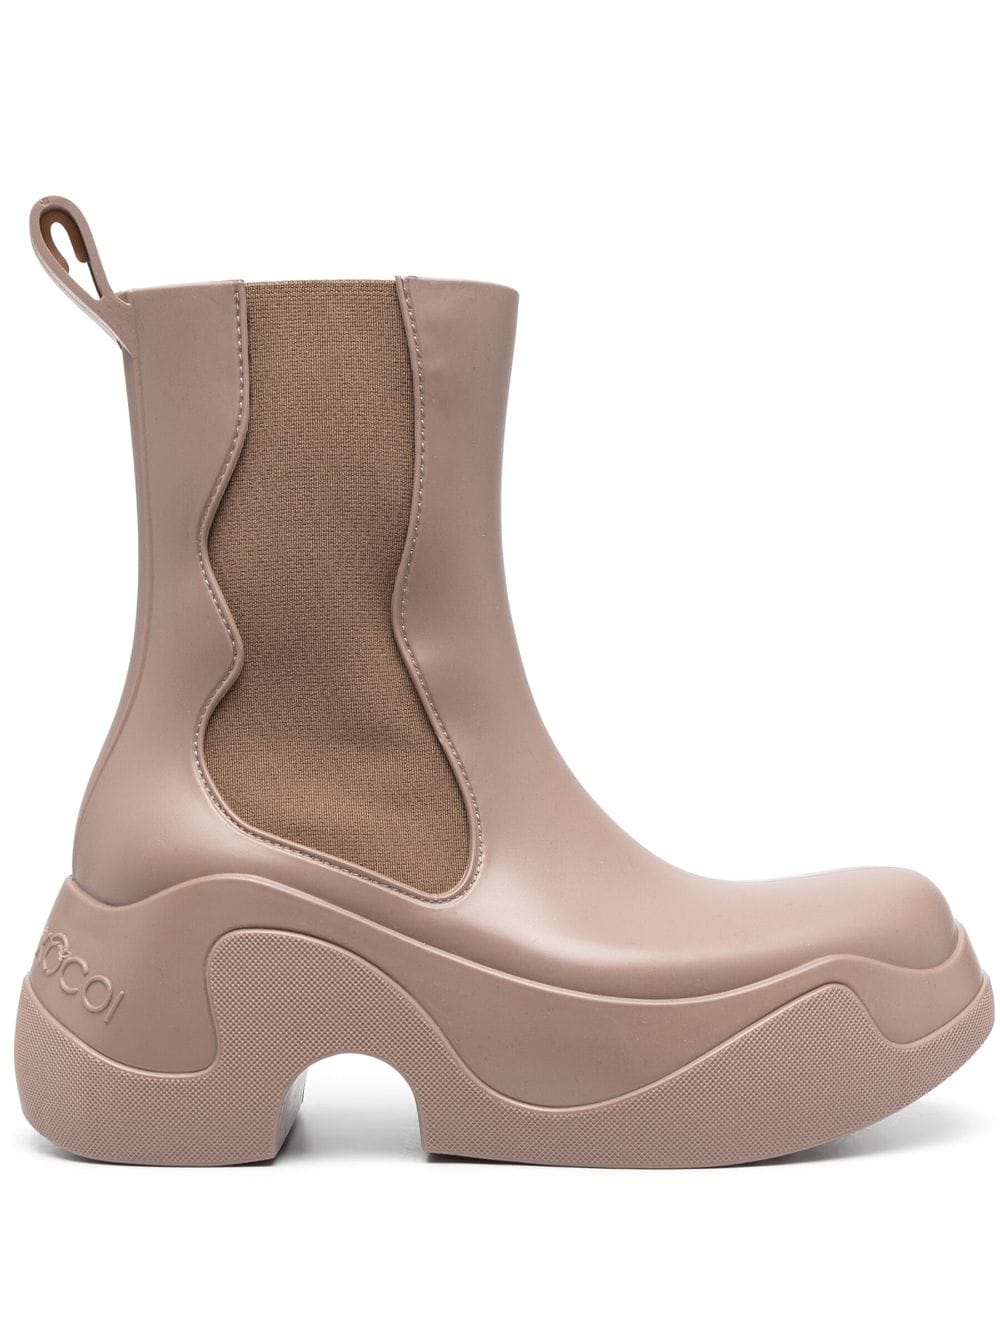 XOCOI RECYCLABLE PVC BOOTS